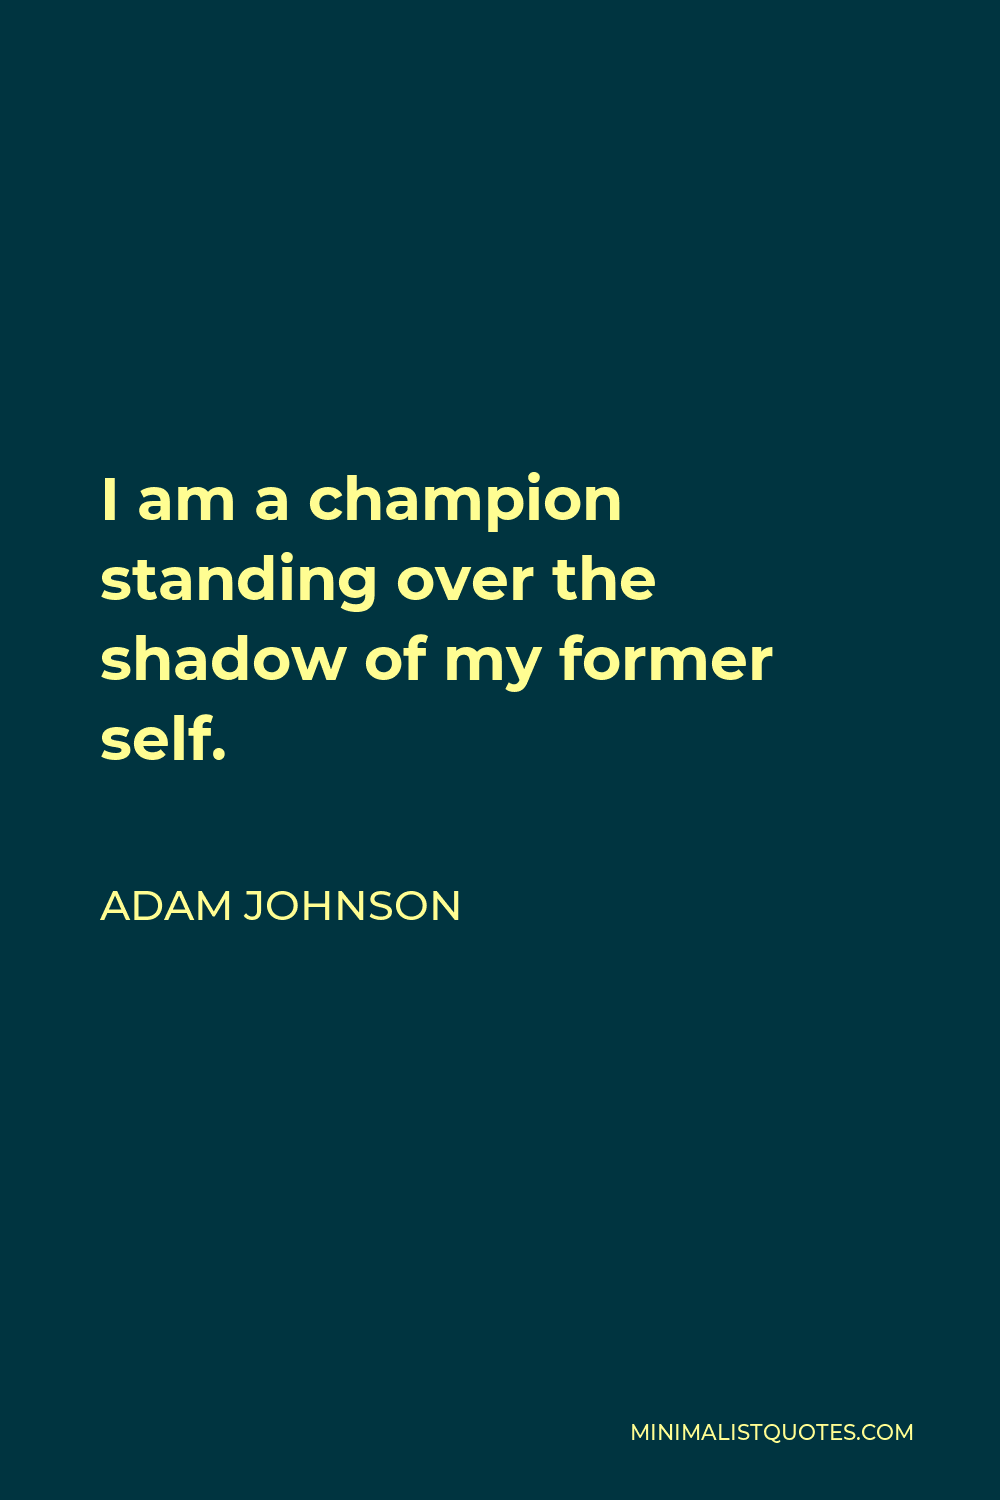 Adam Johnson Quote - I am a champion standing over the shadow of my former self.